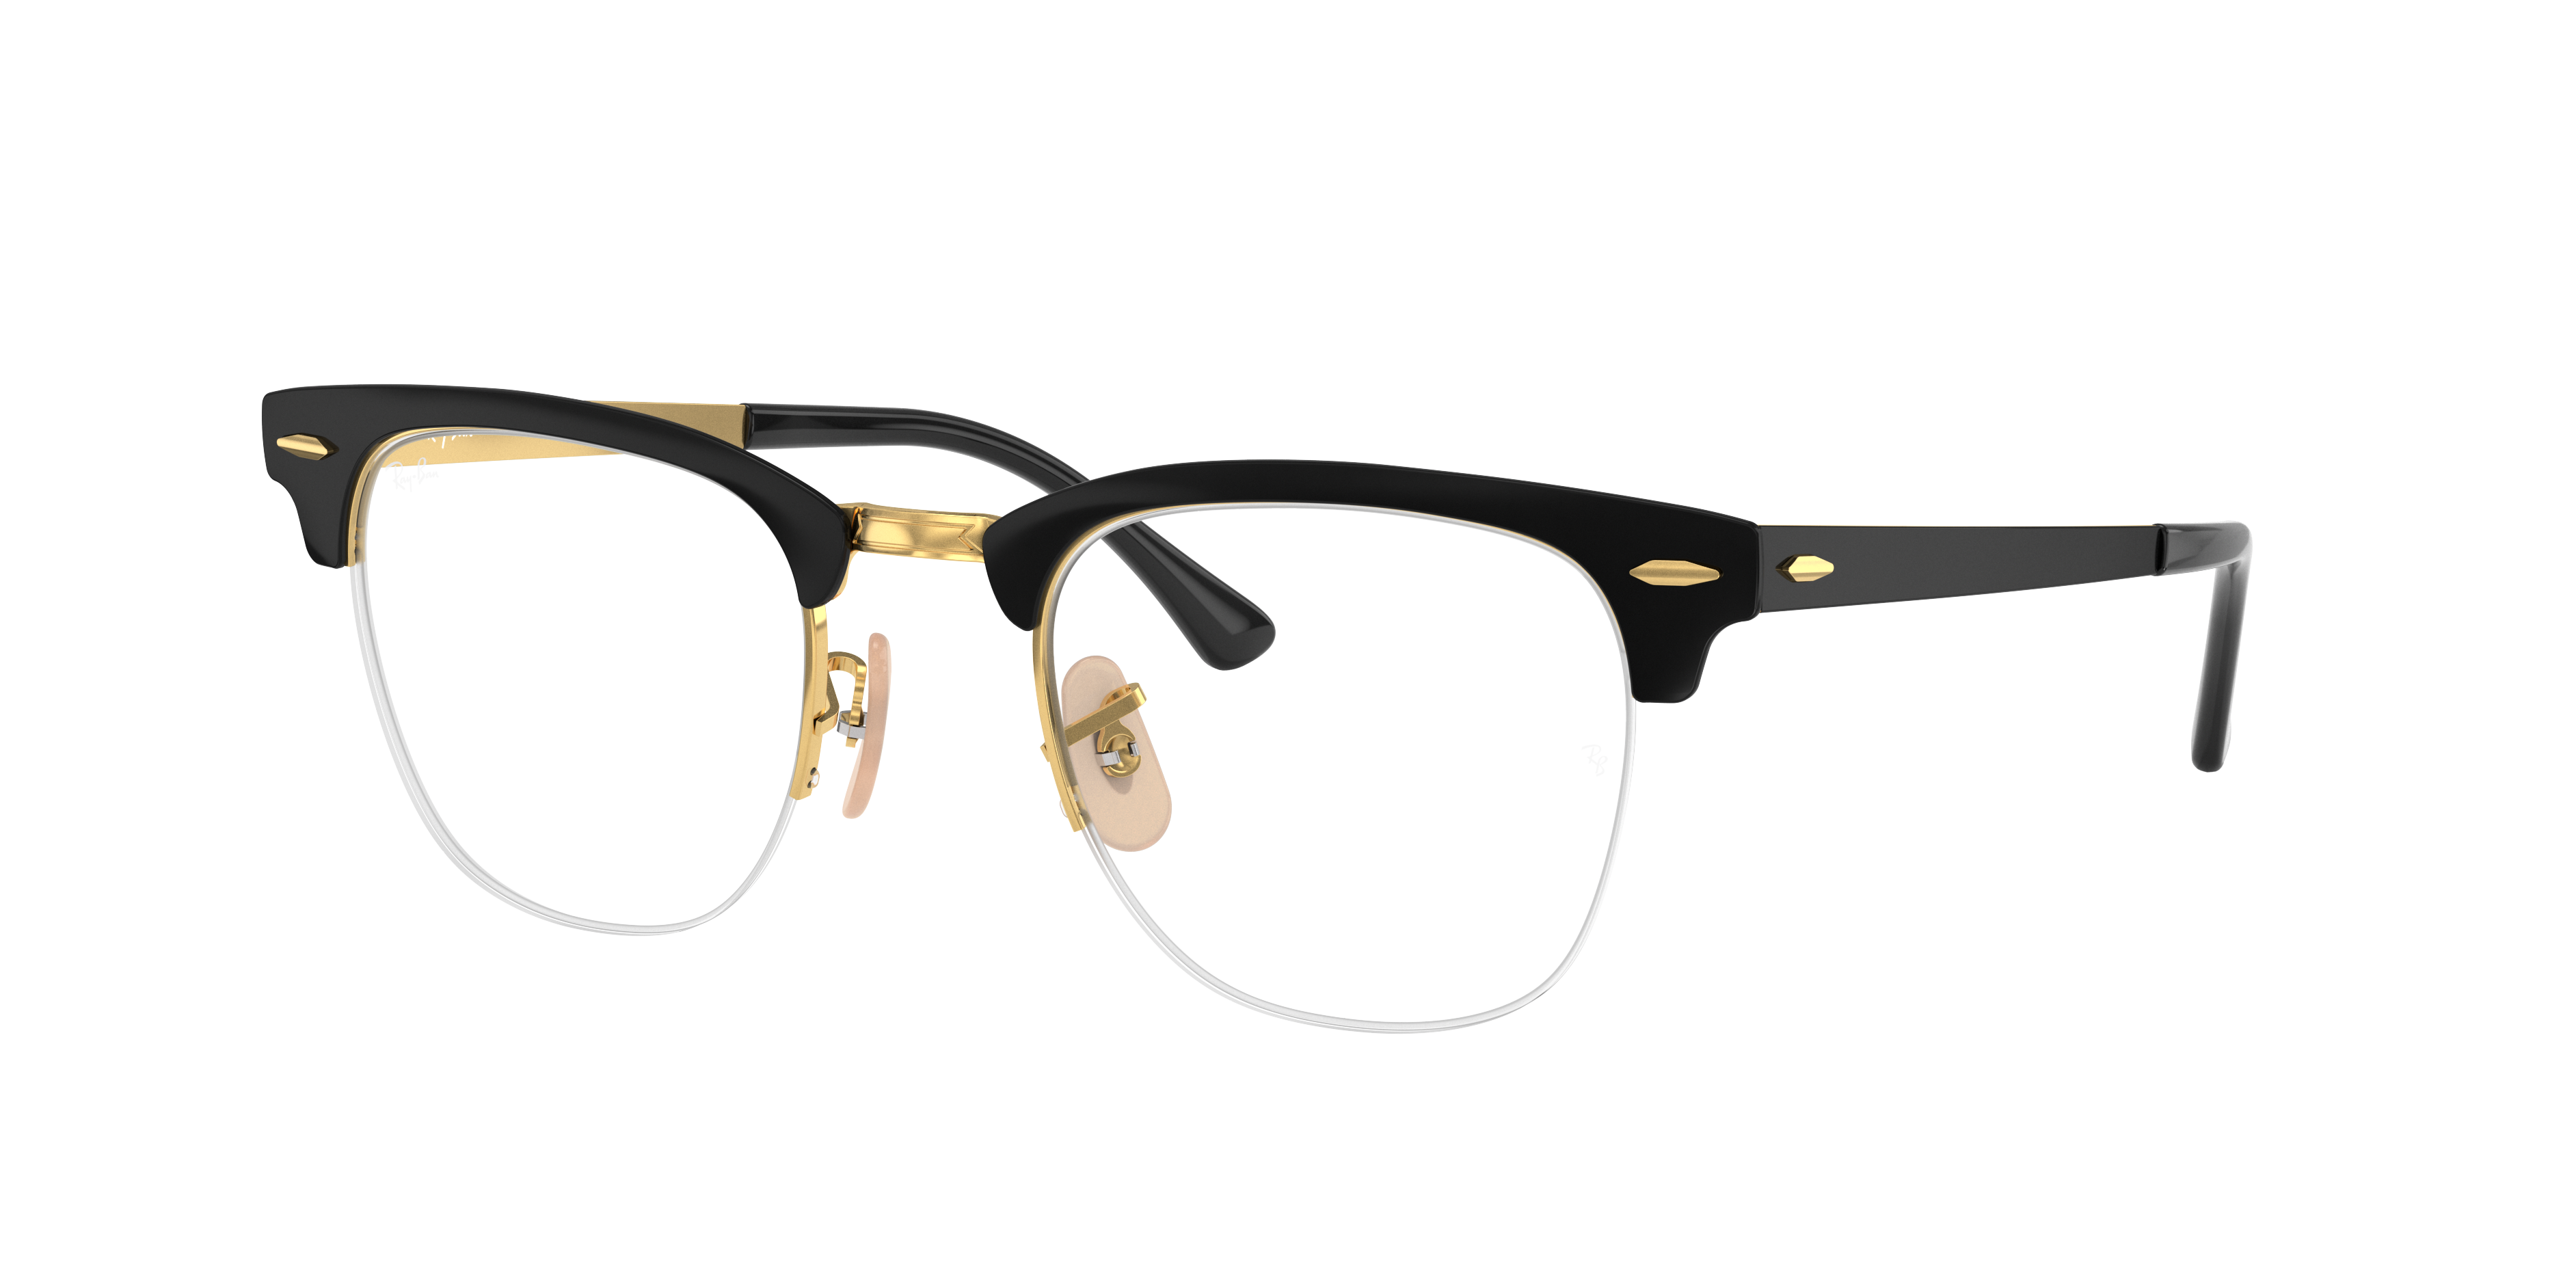 Arriba 119+ imagen black and gold ray ban glasses